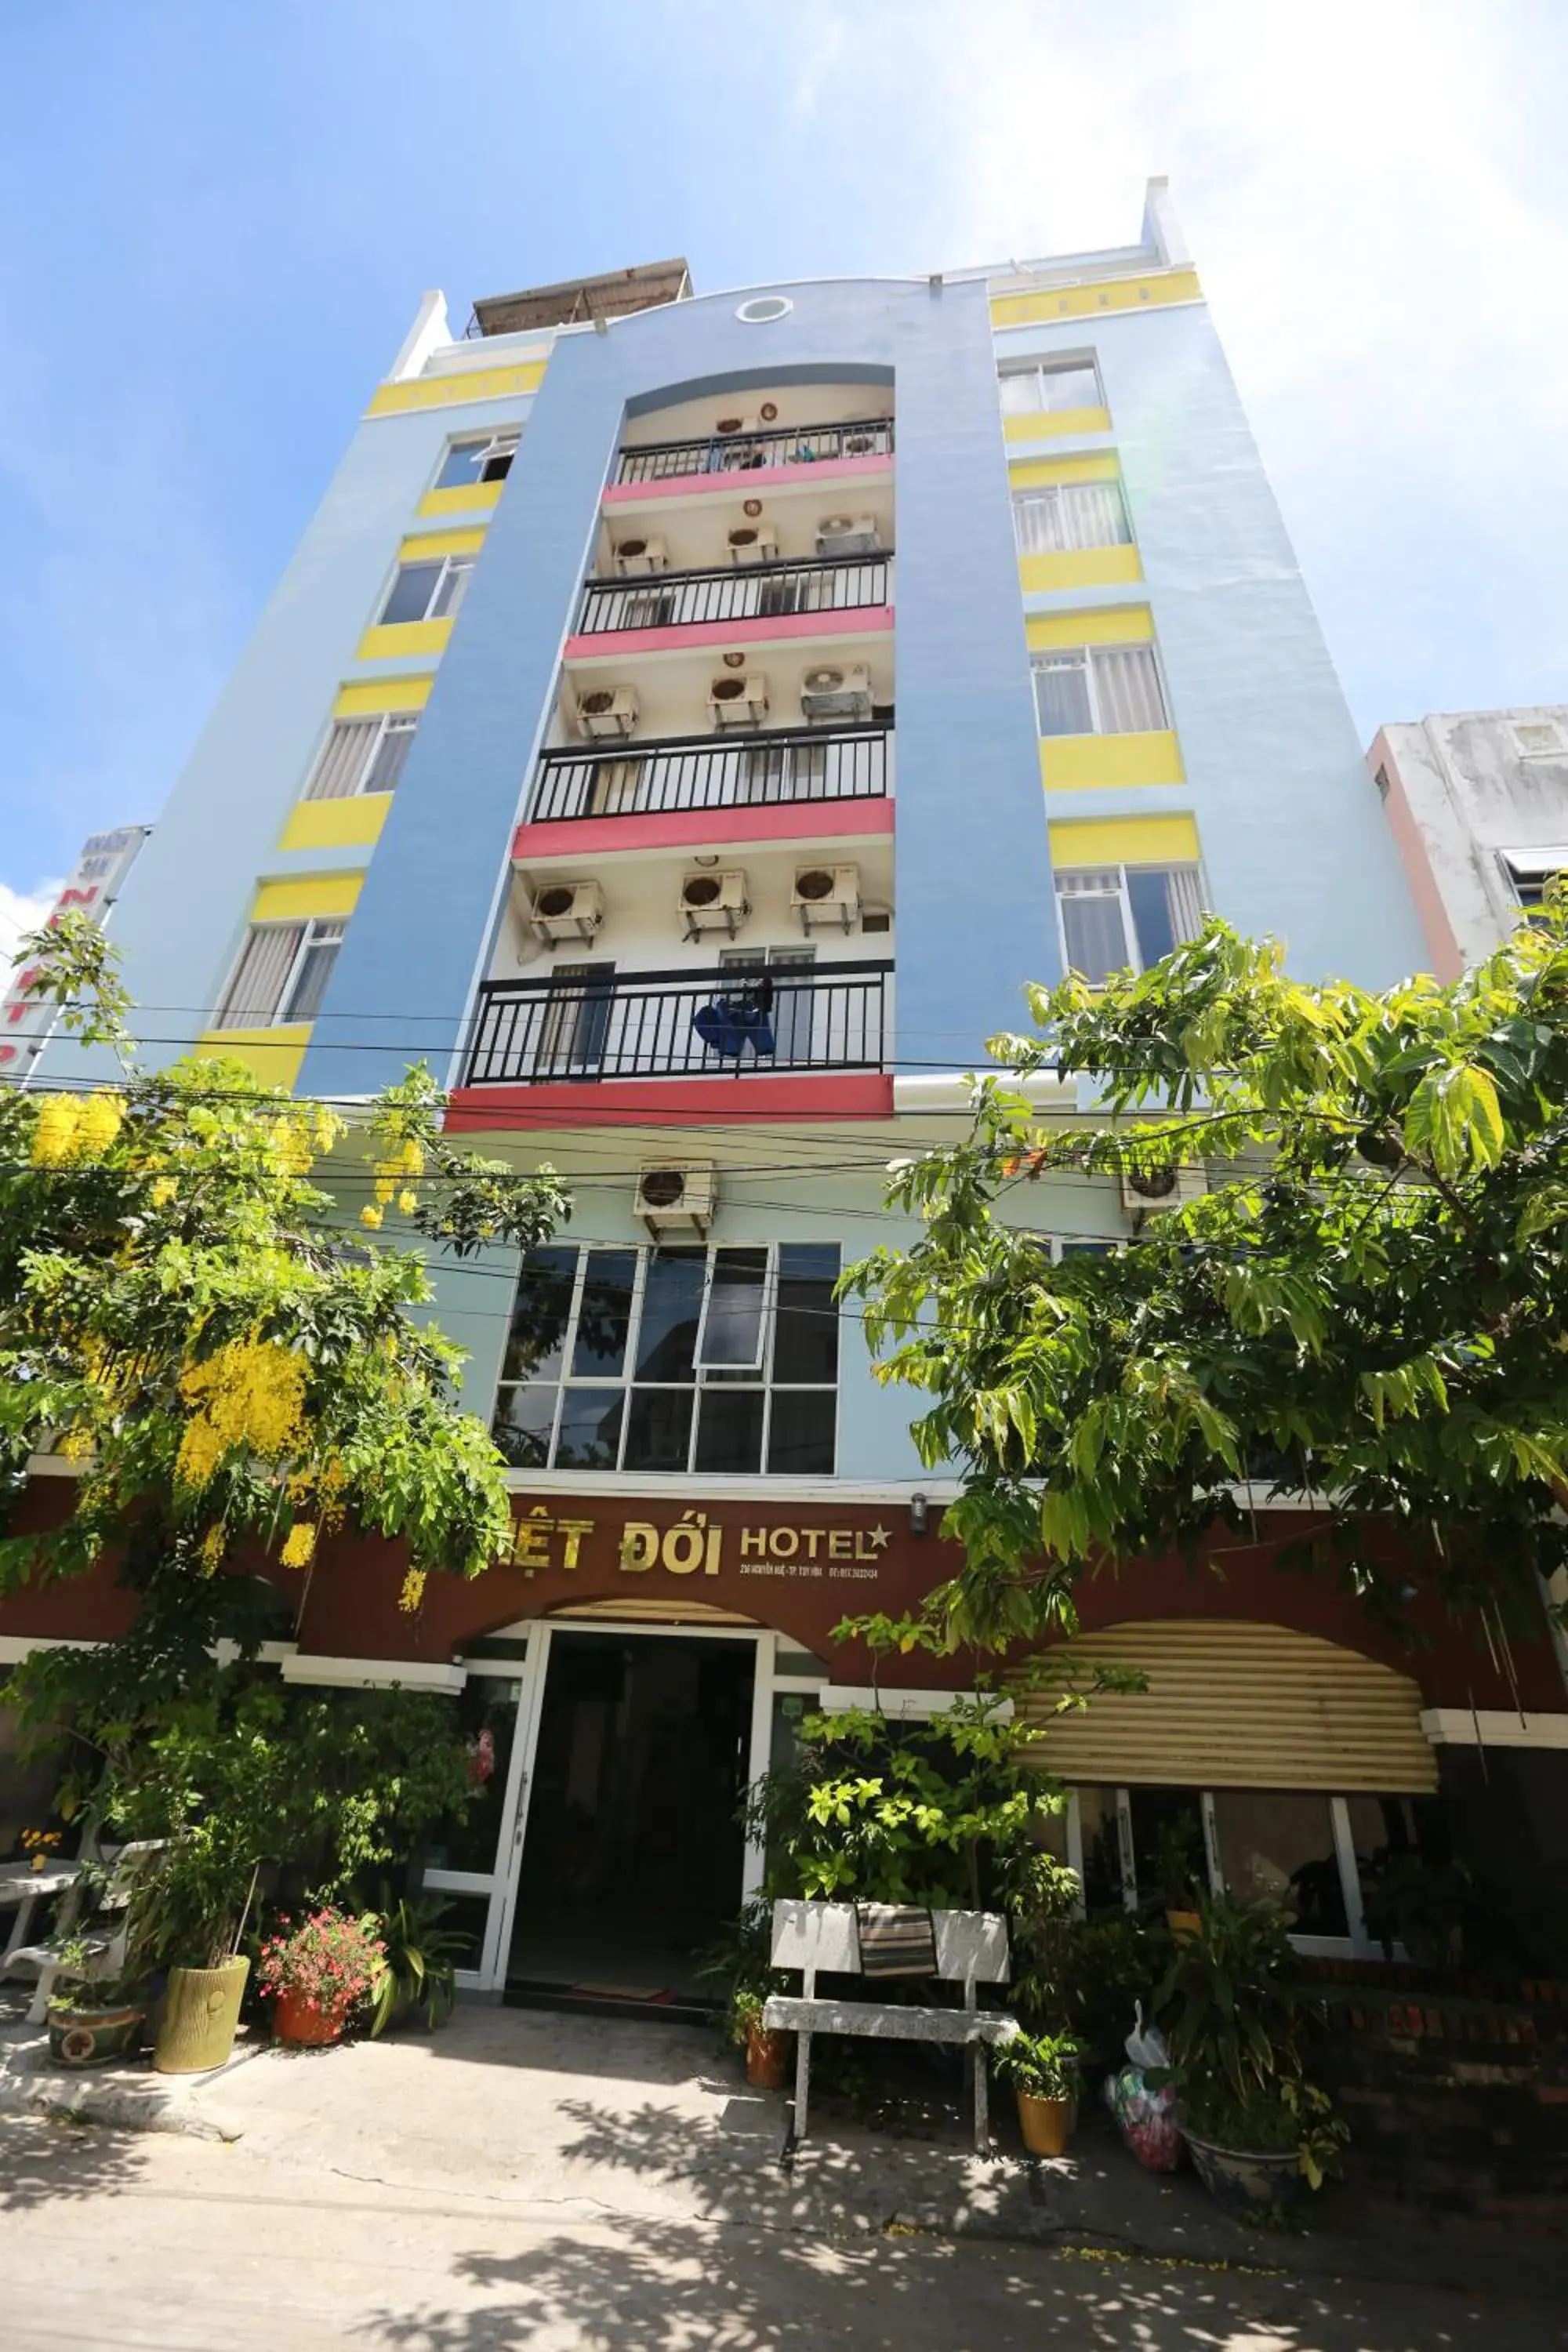 Property Building in Nhiet Doi Hotel